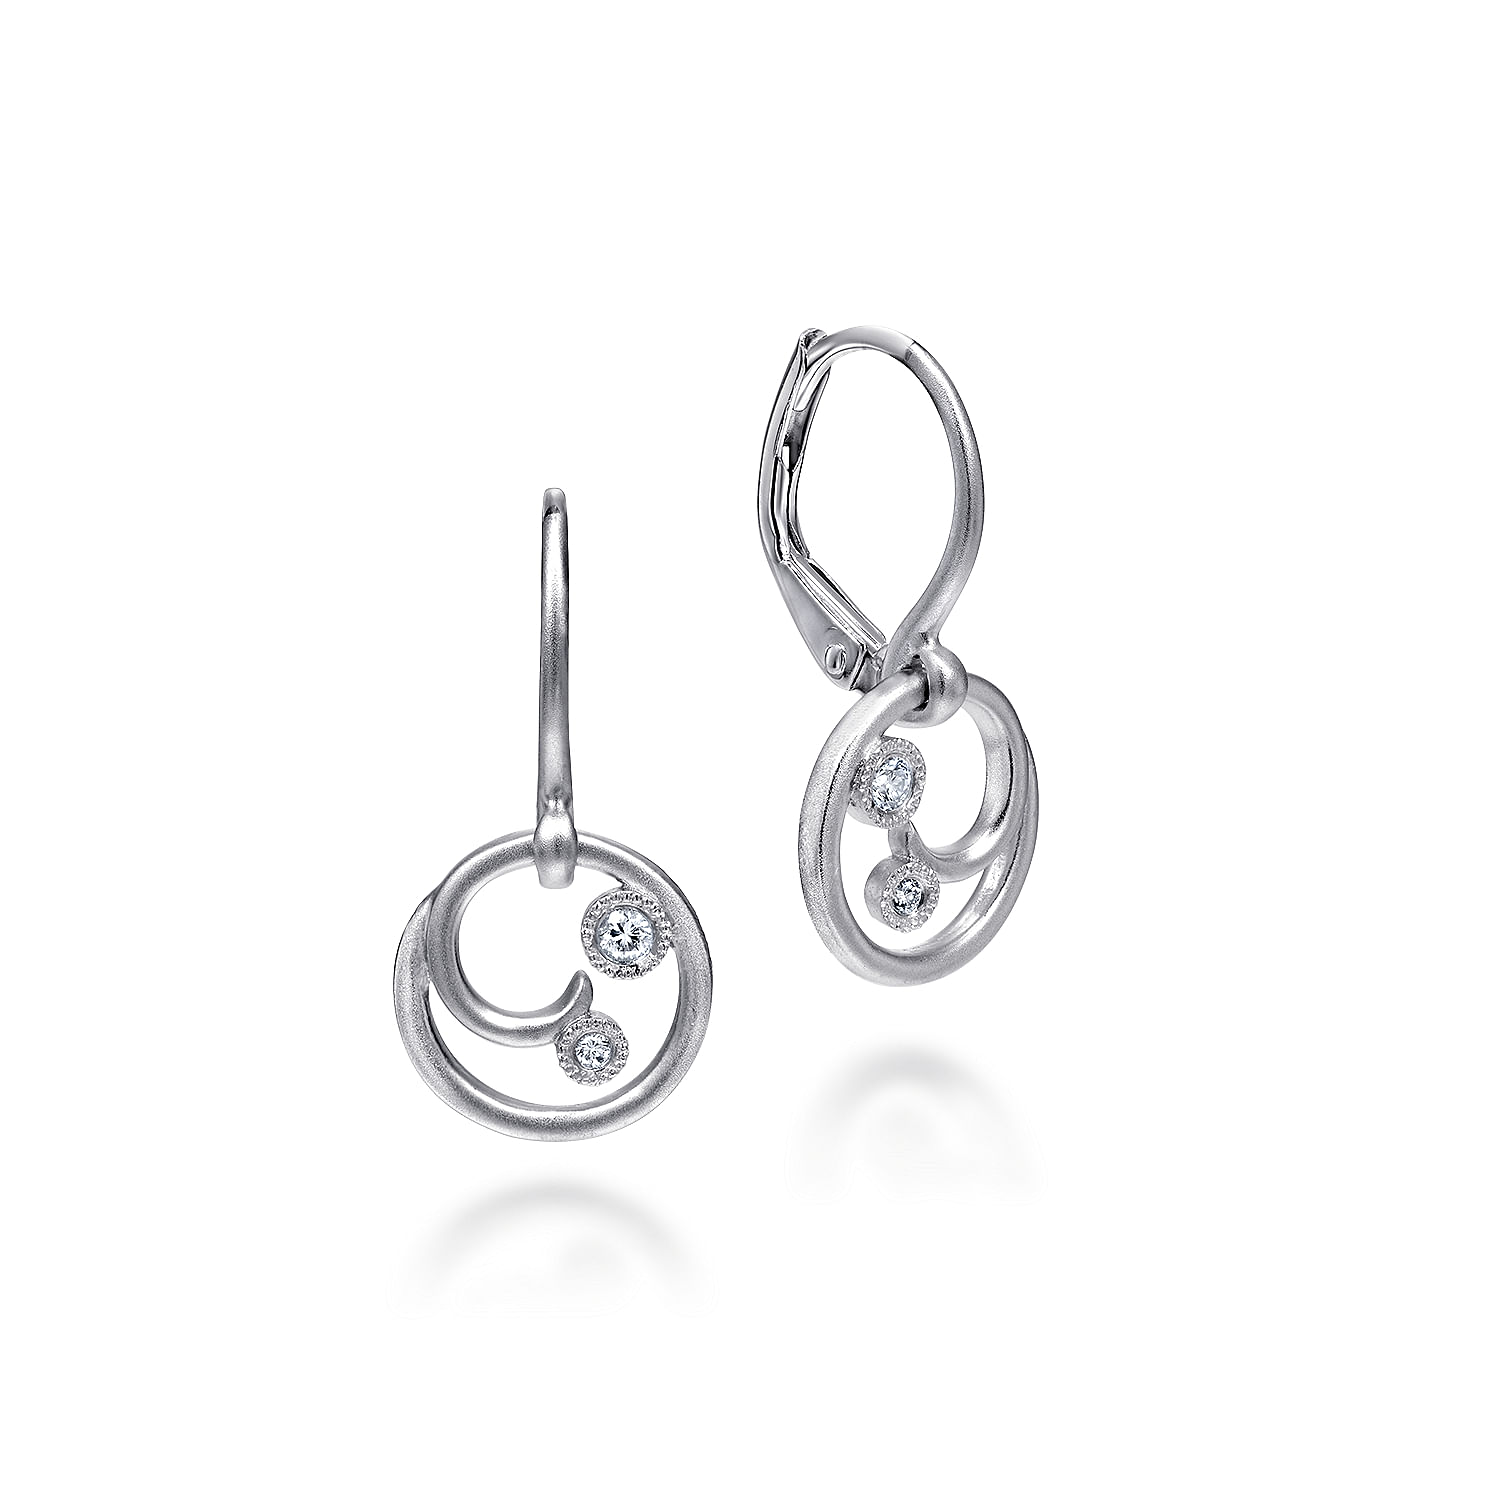 925 Sterling Silver Dainty Round Leverback Earrings with Diamond Accents